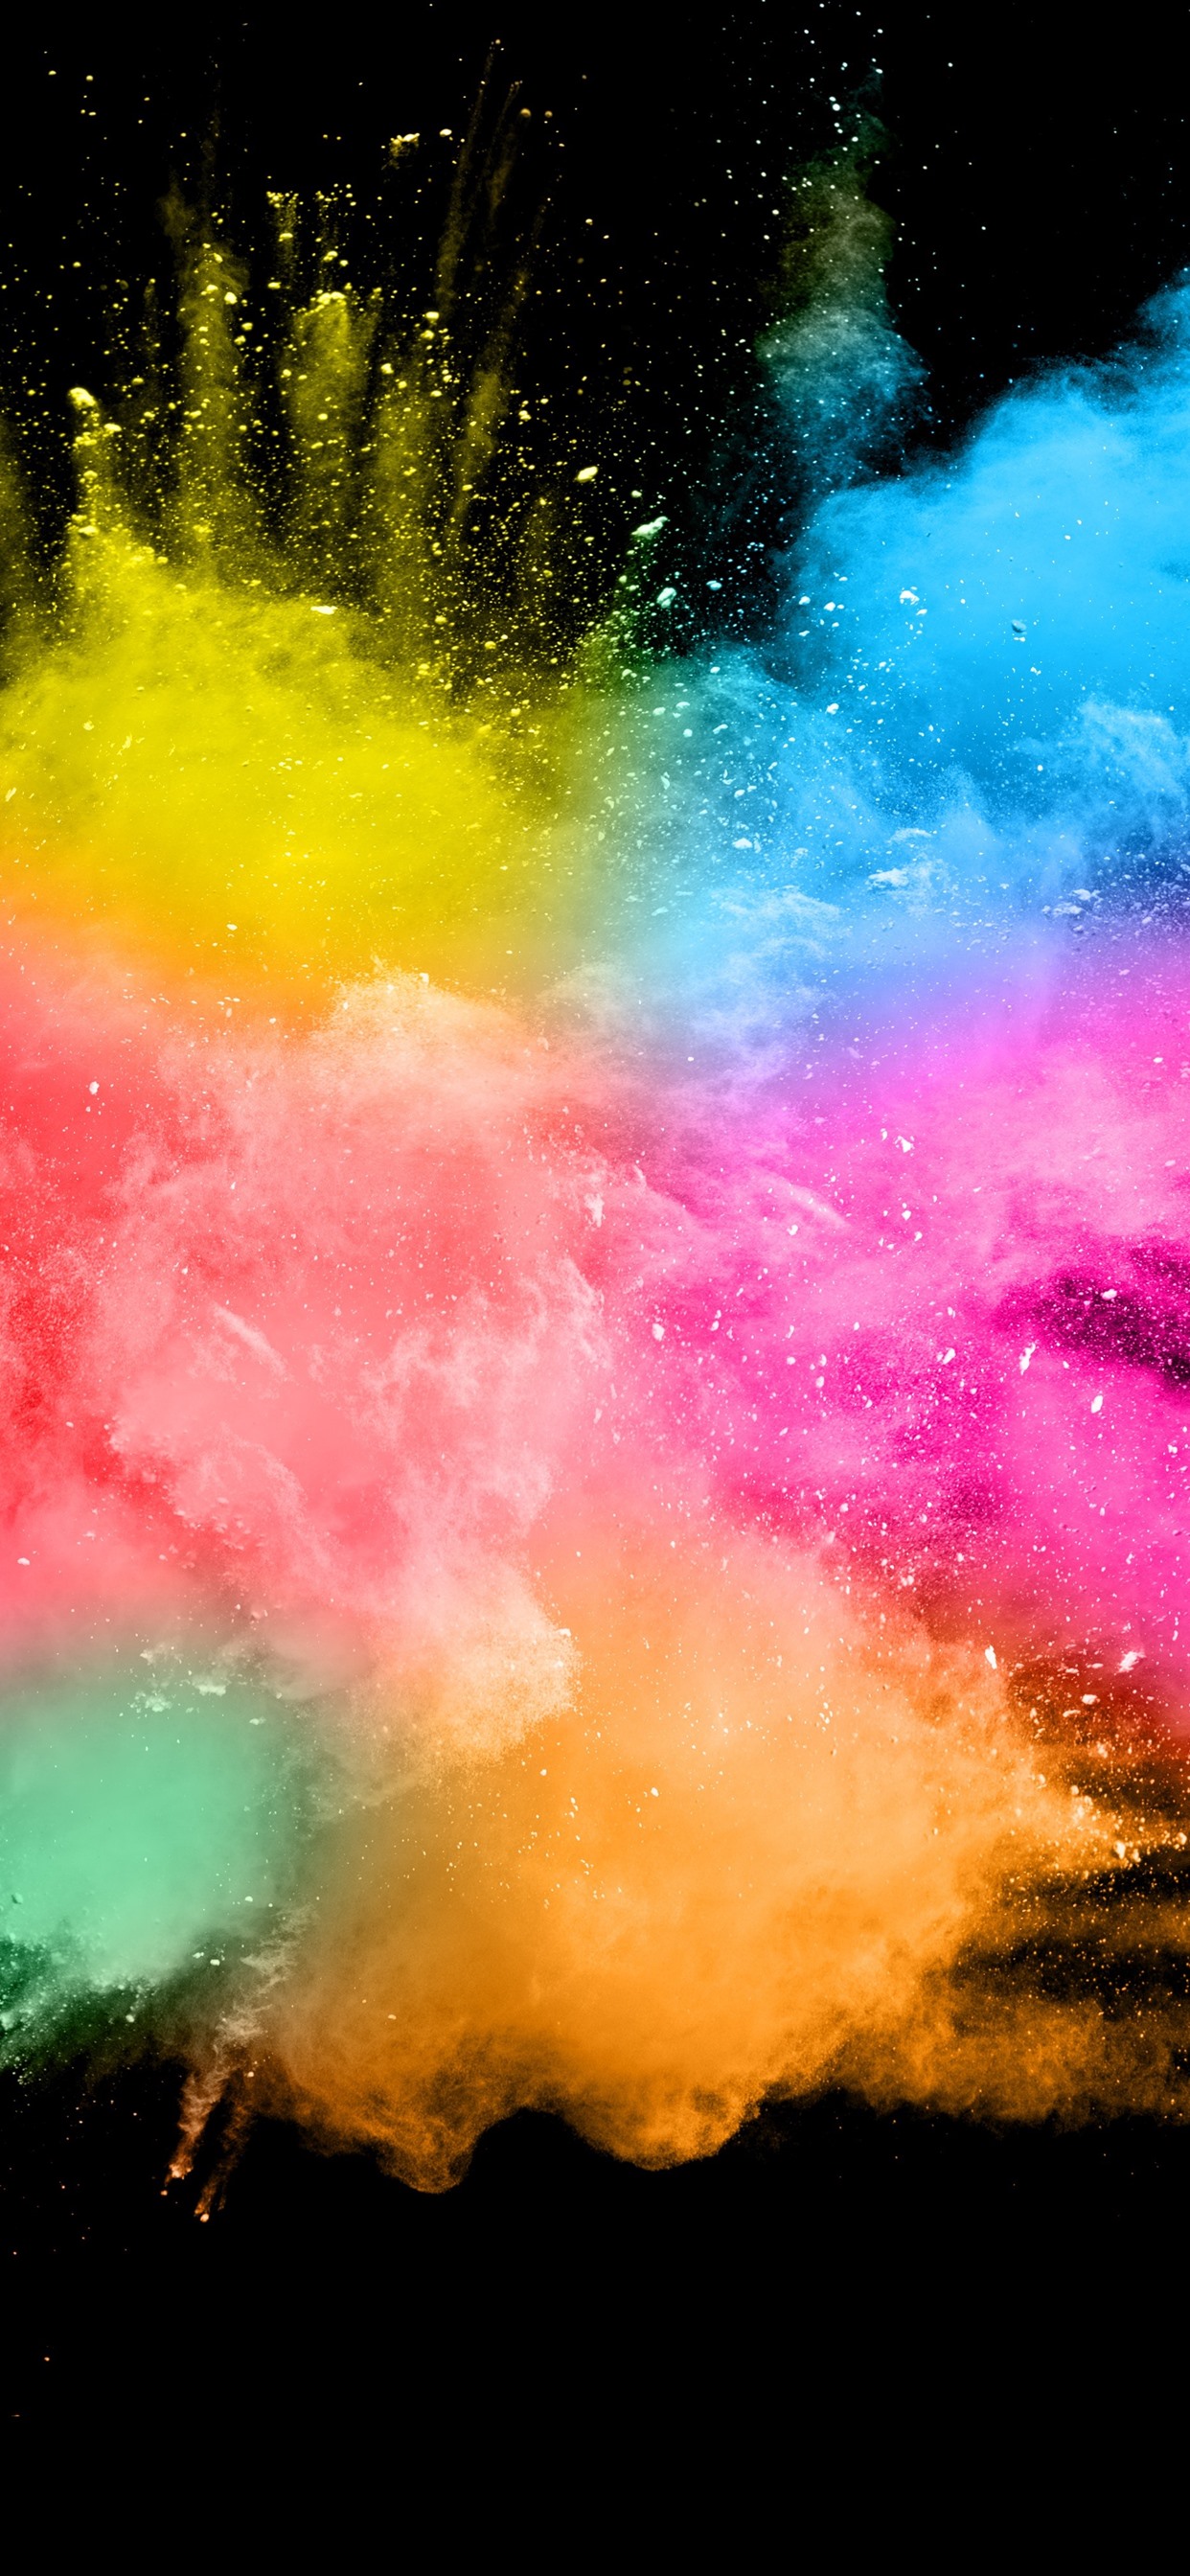 Colorful Smoke, Splash, Abstract, Black Background 1242x2688 IPhone 11 Pro XS Max Wallpaper, Background, Picture, Image